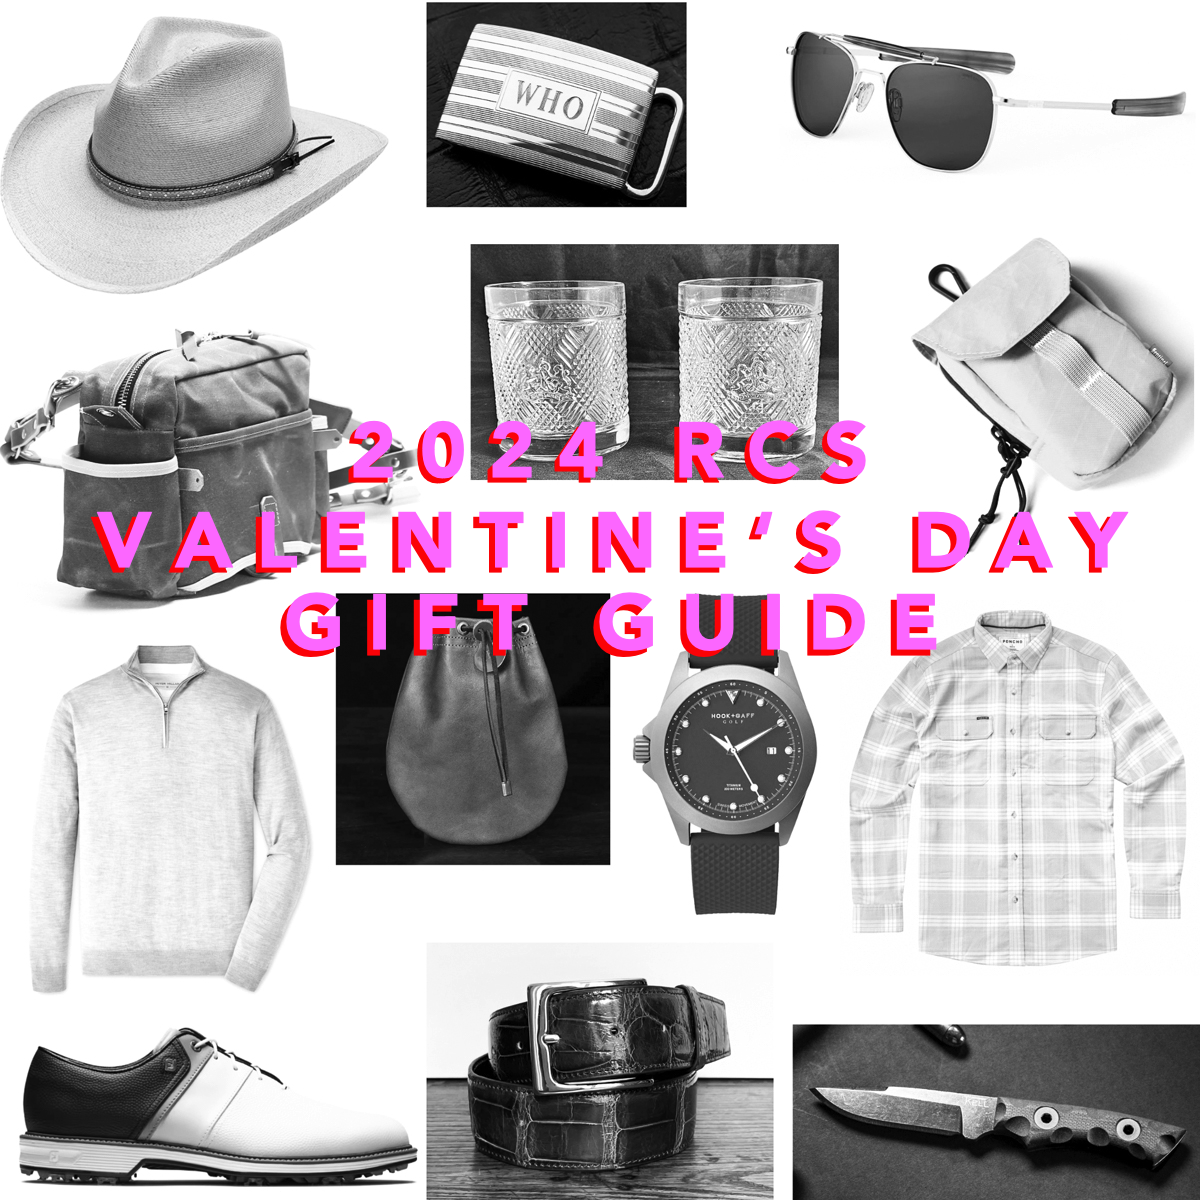 2024 RCS Valentine’s Day Gift Guide